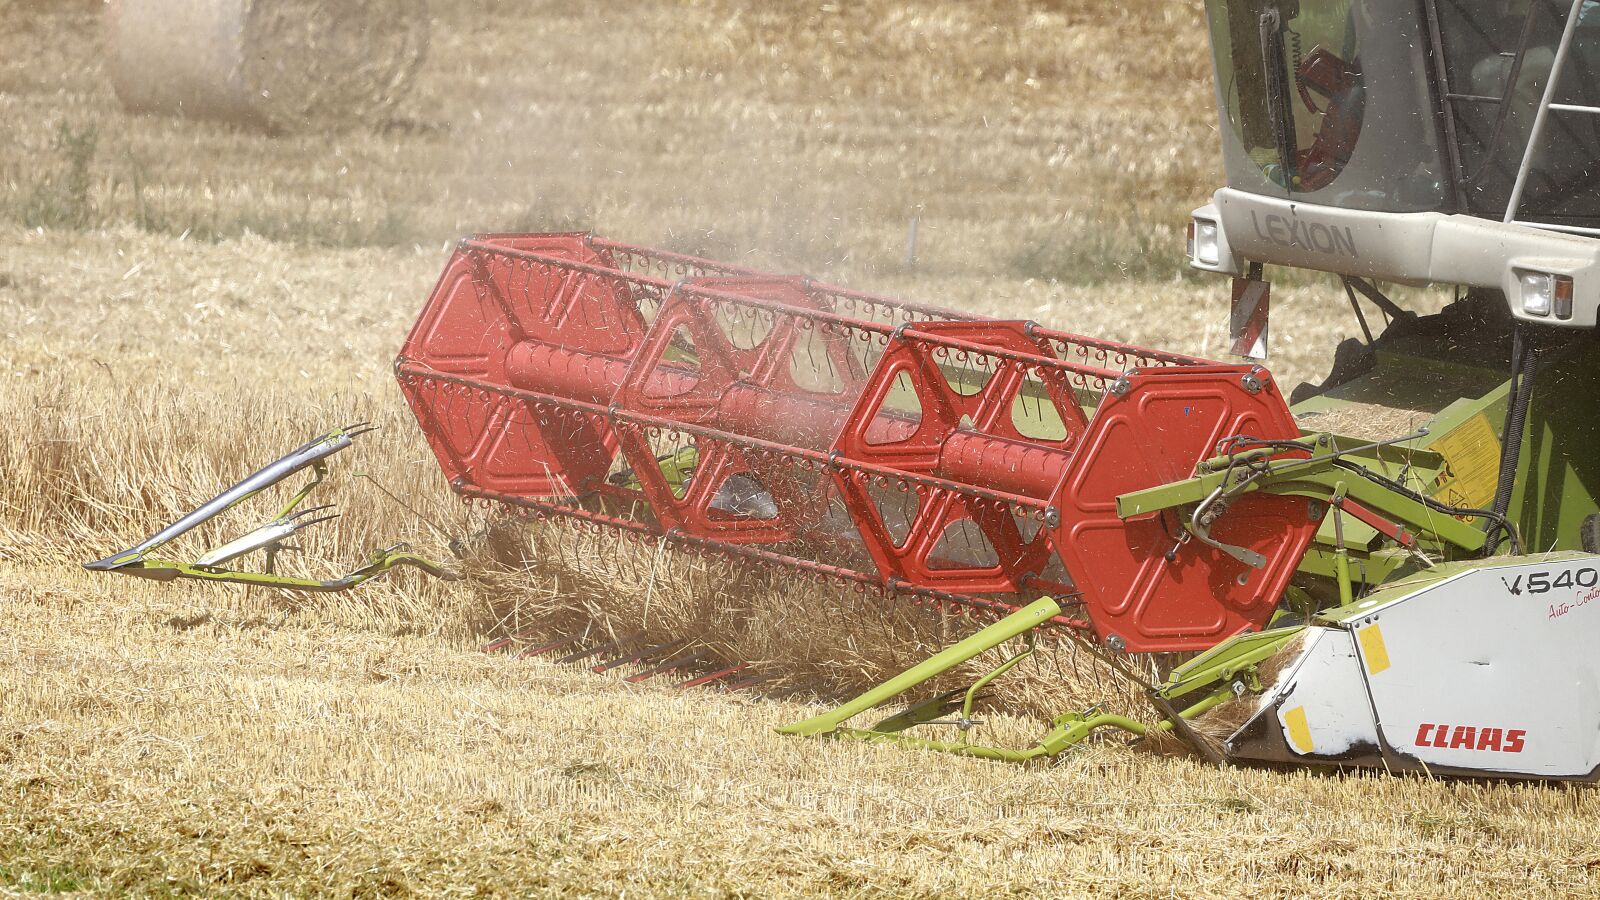 150-600mm F5-6.3 DG OS HSM | Contemporary 015 sample photo. Harvest, combine harvester, agriculture photography